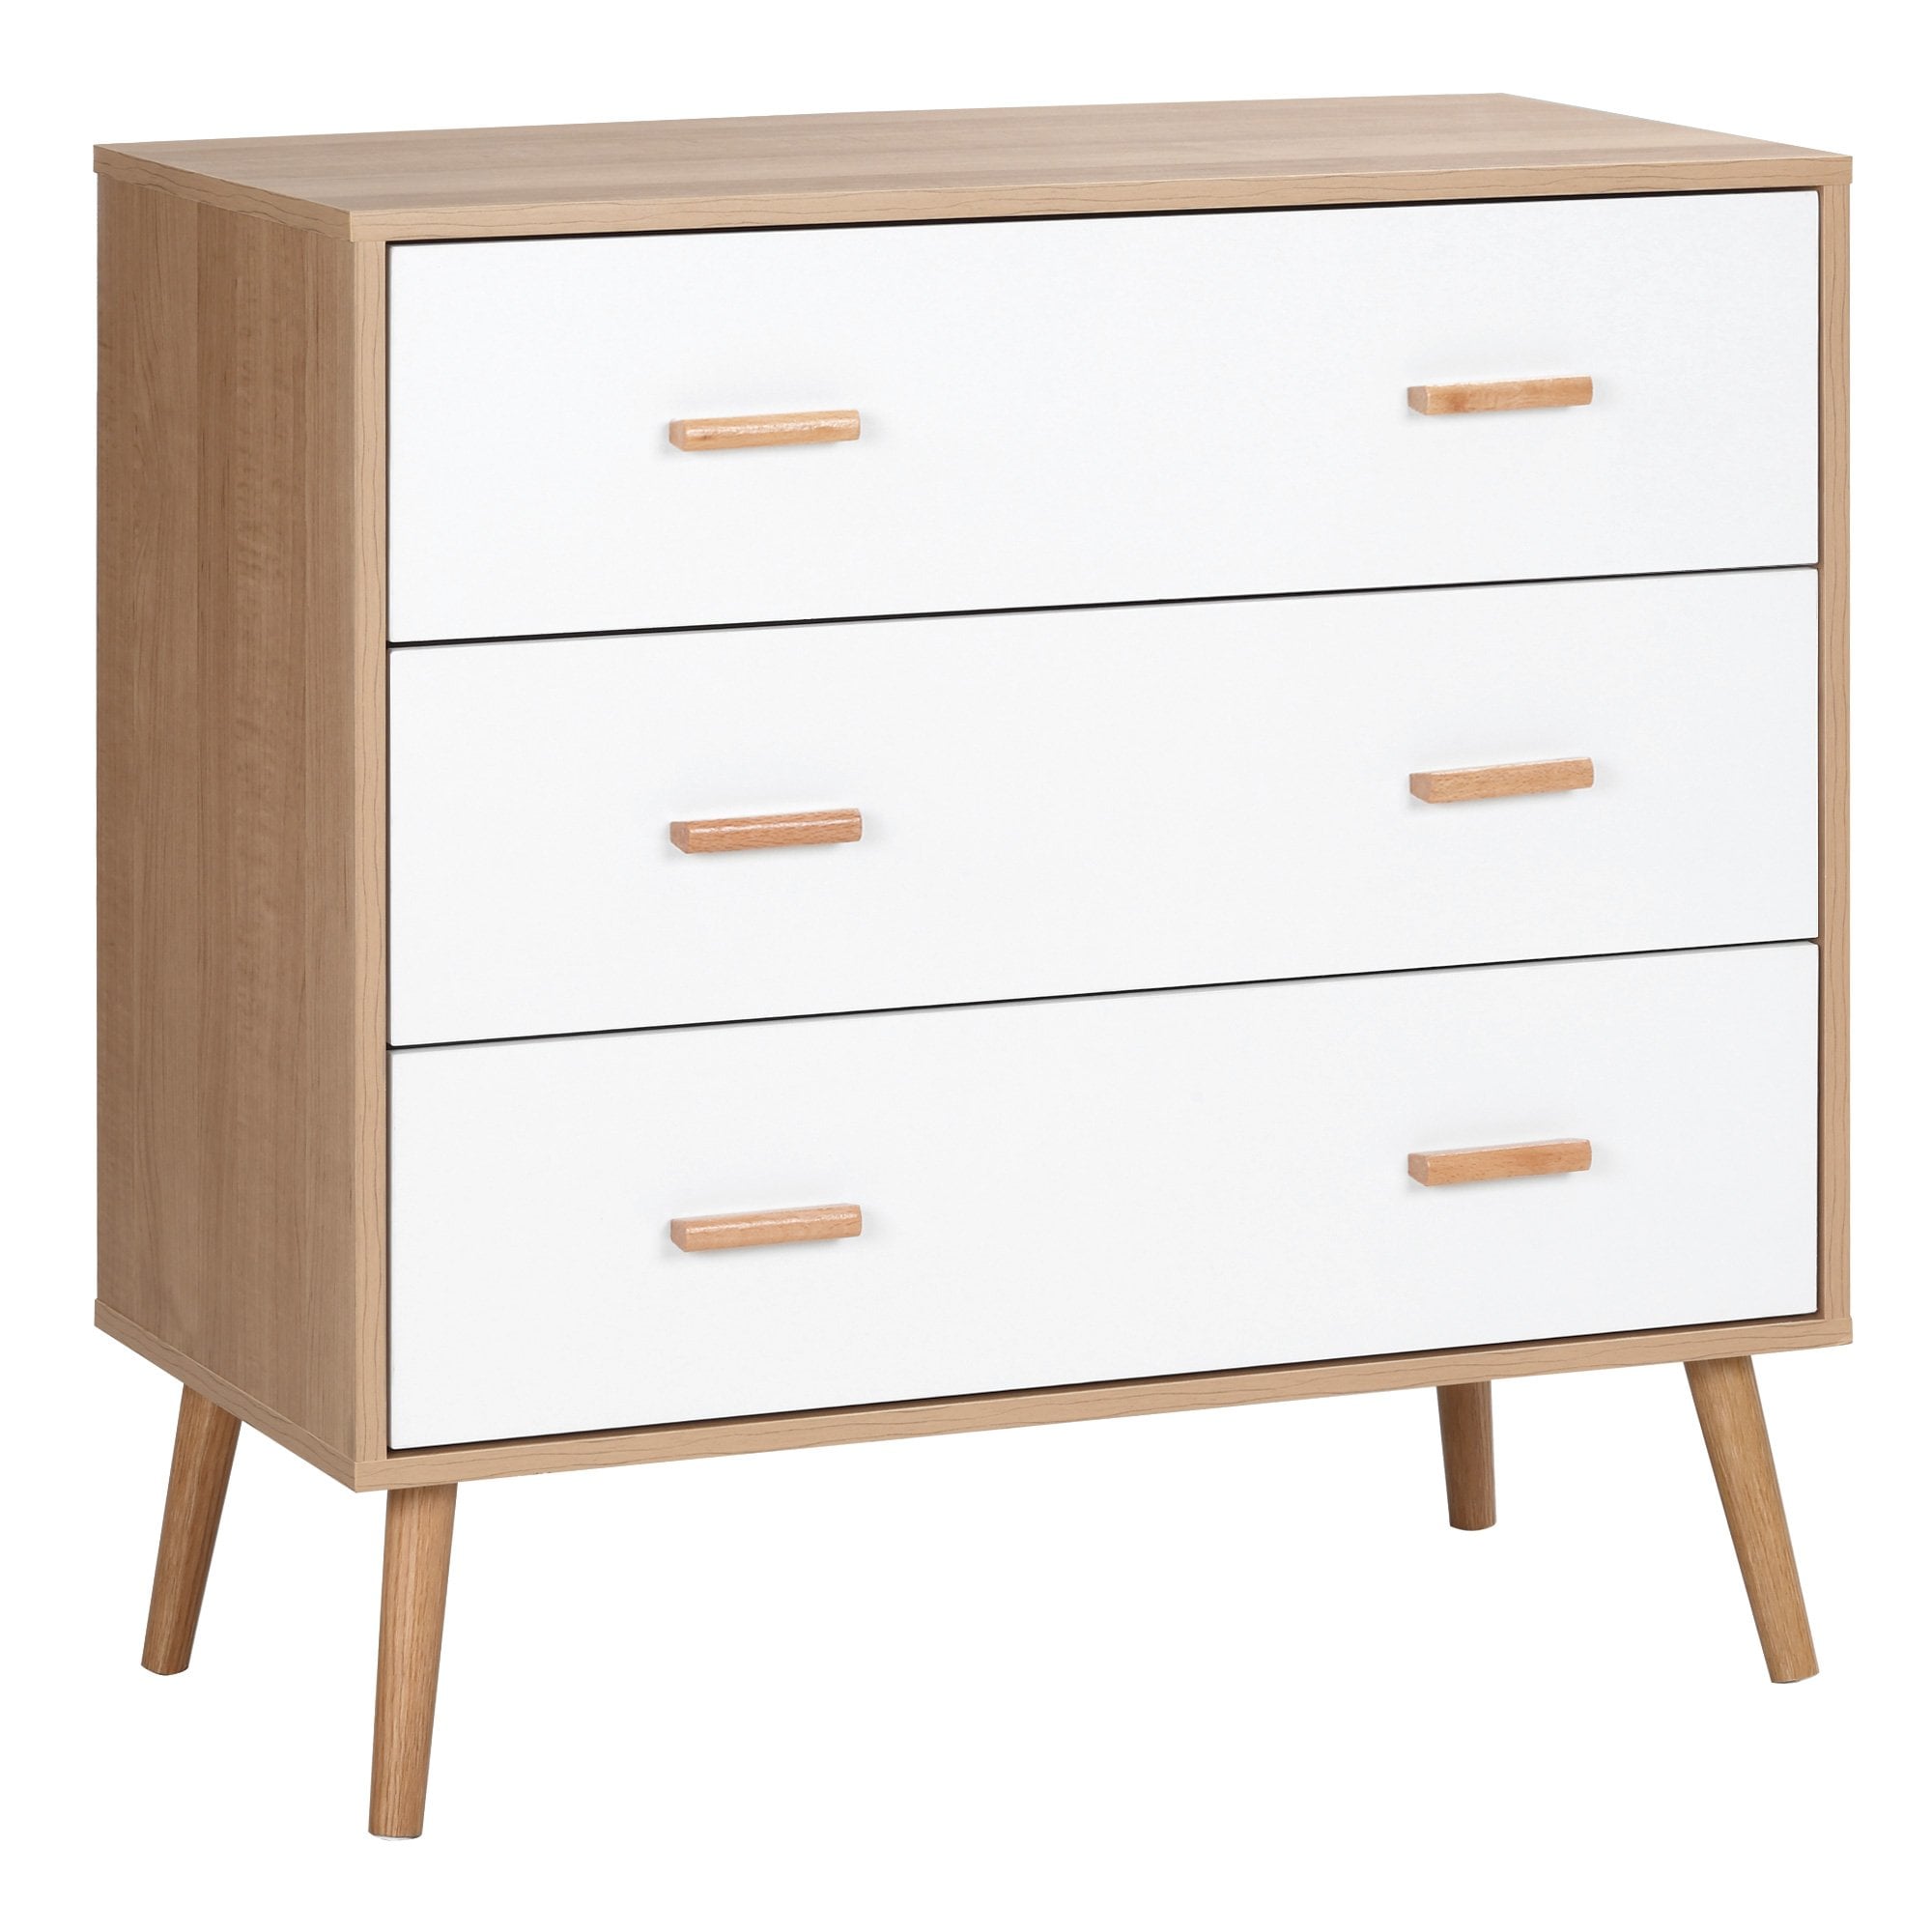 HOMCOM Chest of Drawers with 3 Drawers - Bedroom Cabinet - Storage Organizer for Living Room - White and Natural  | TJ Hughes